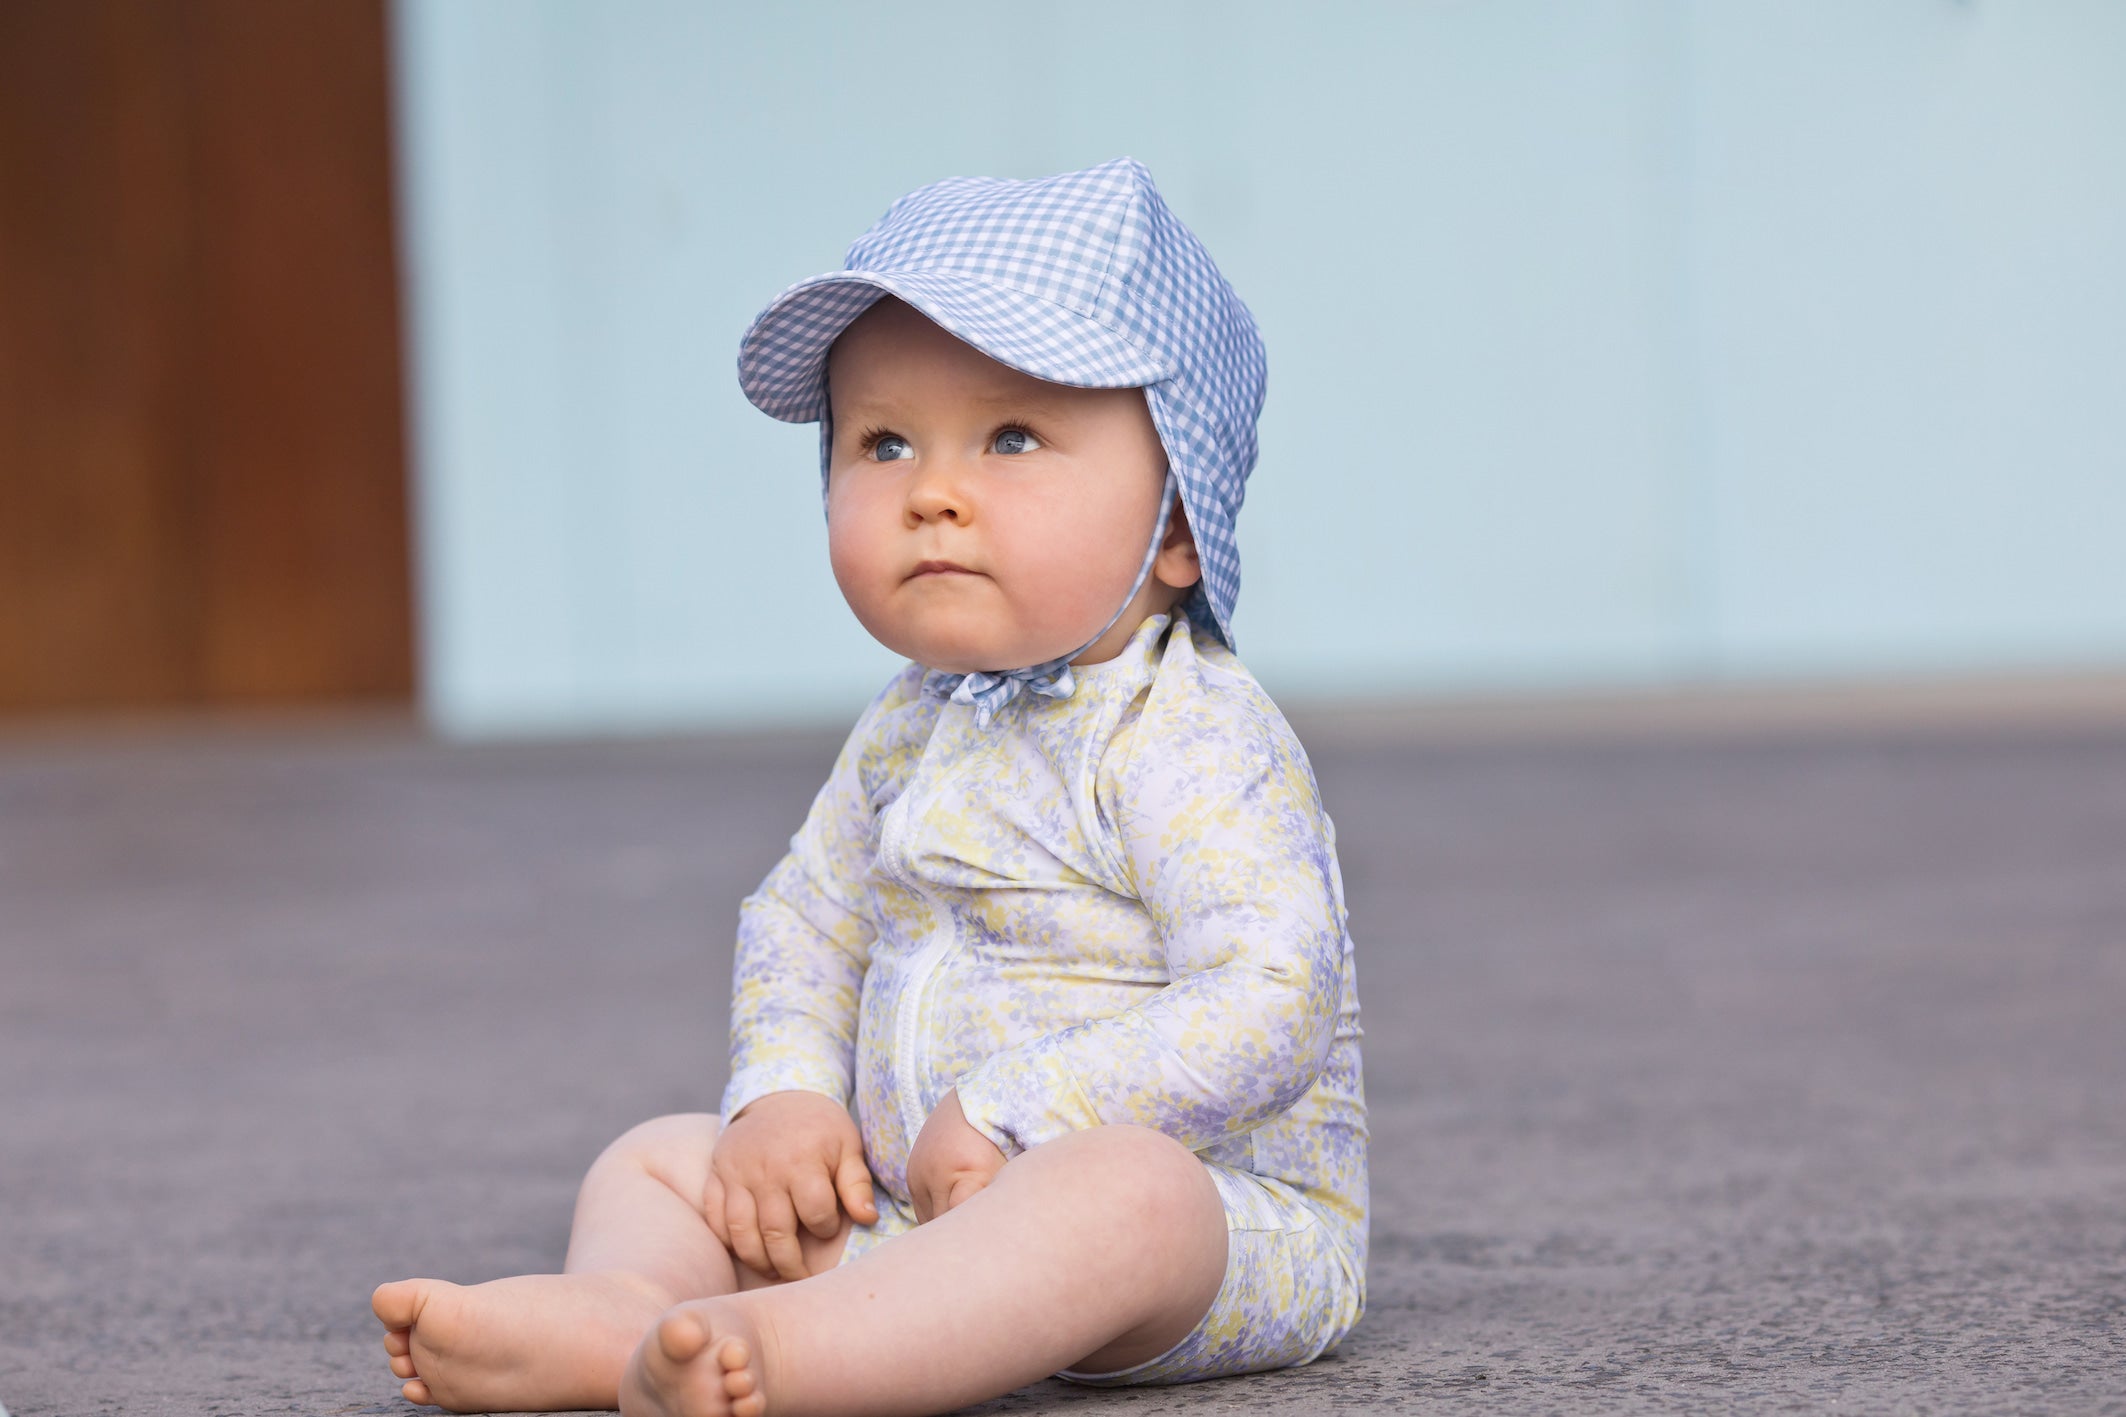 bells blue gingham swim flap hat (size 3-6 yrs sold out)